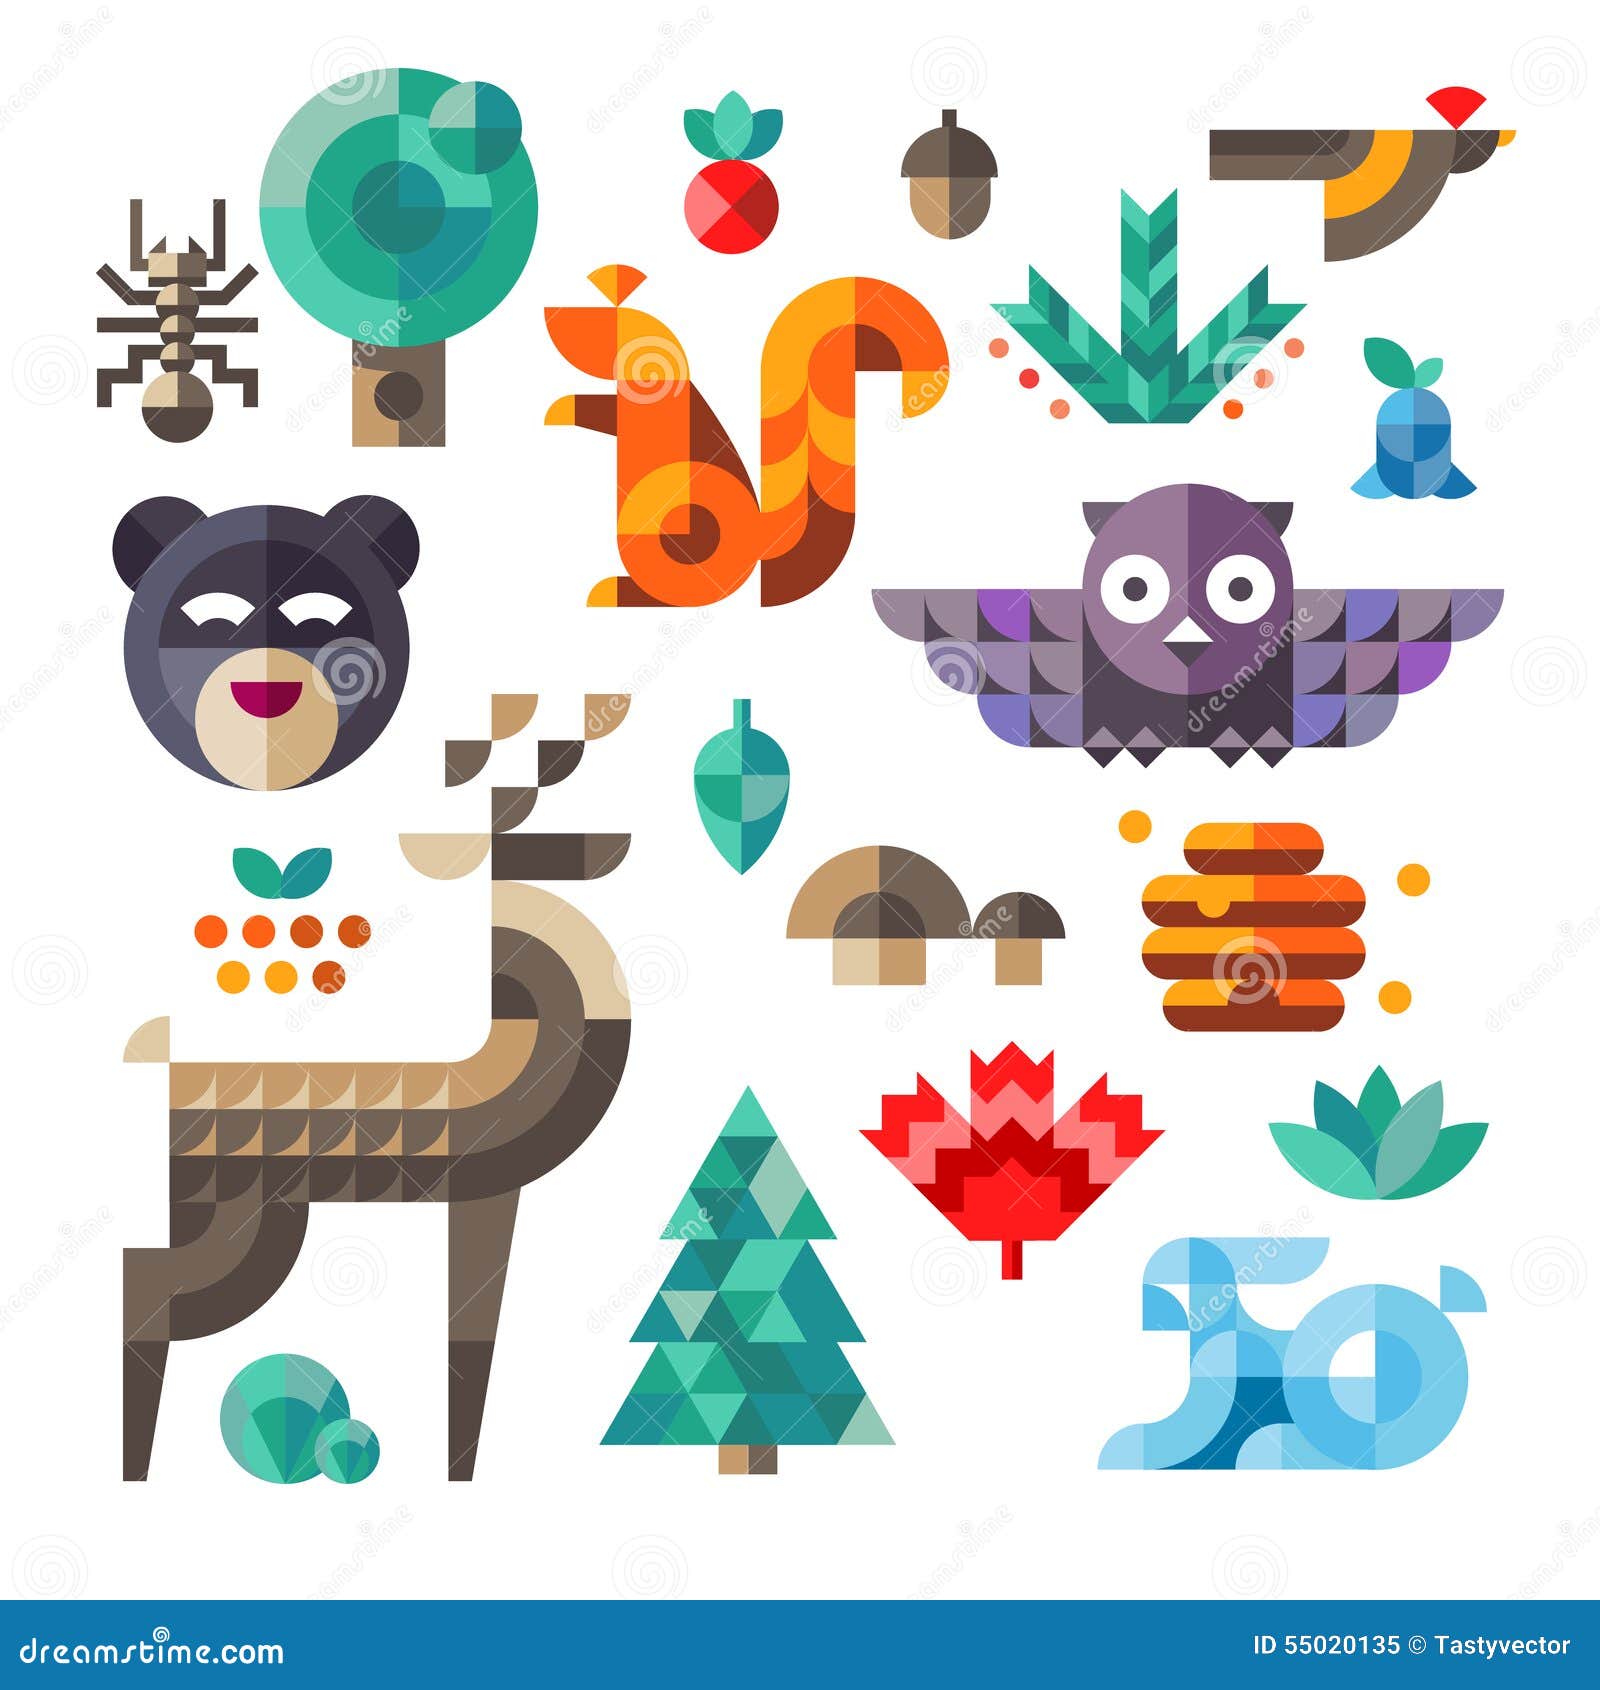 forest icons, geometric proportions